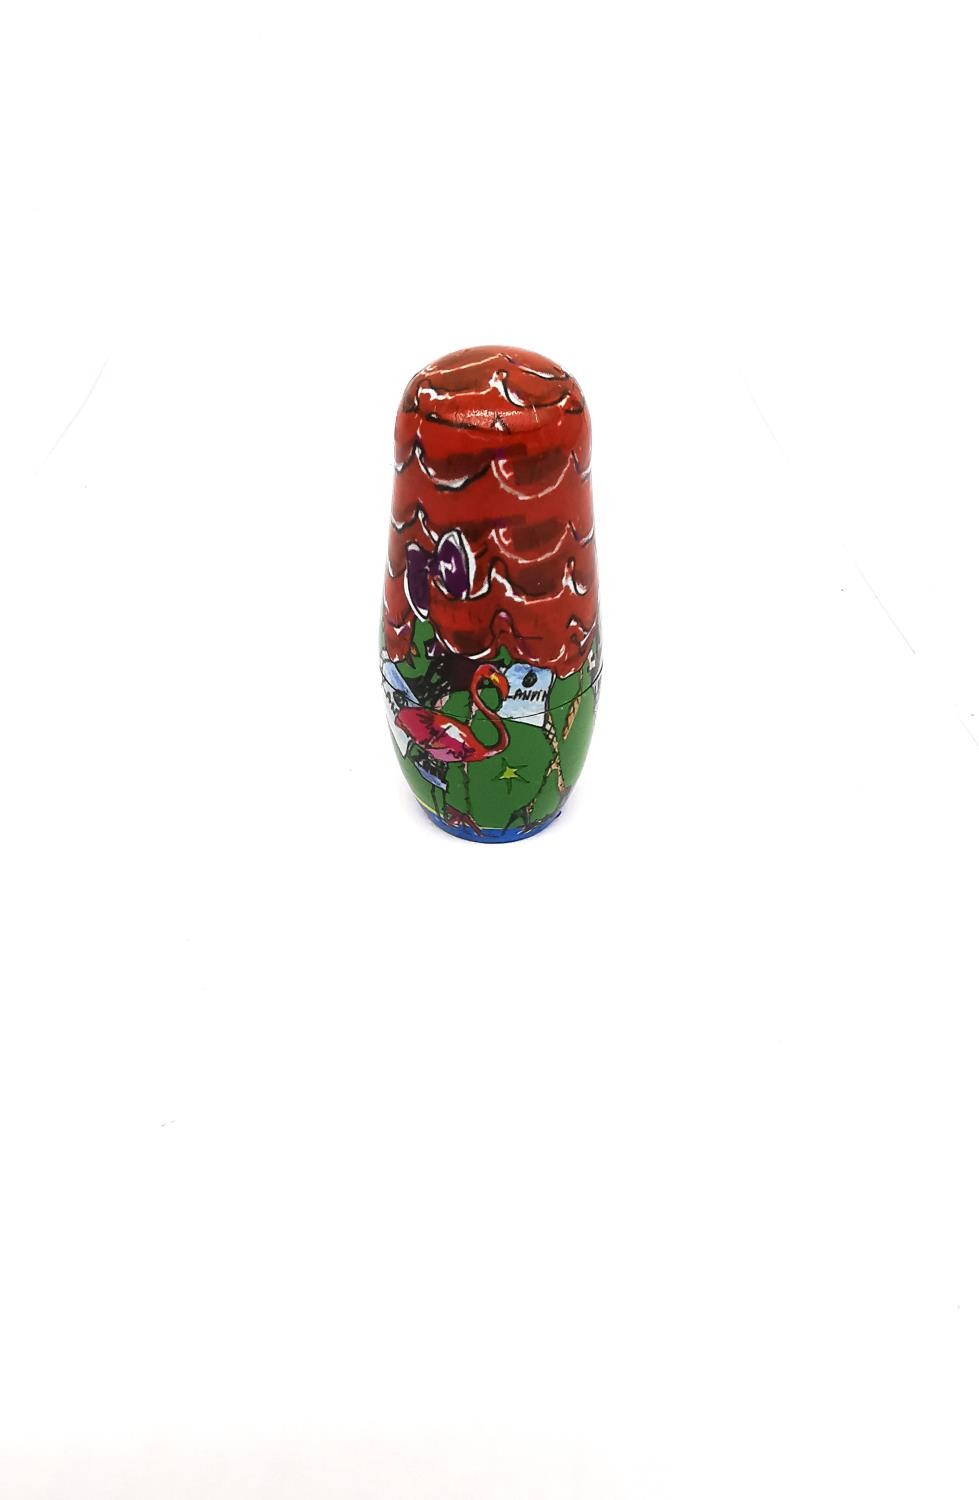 Lanvin, Paris, a set of Matryoshka dolls each hand painted with a different design. Makers mark to - Image 19 of 25